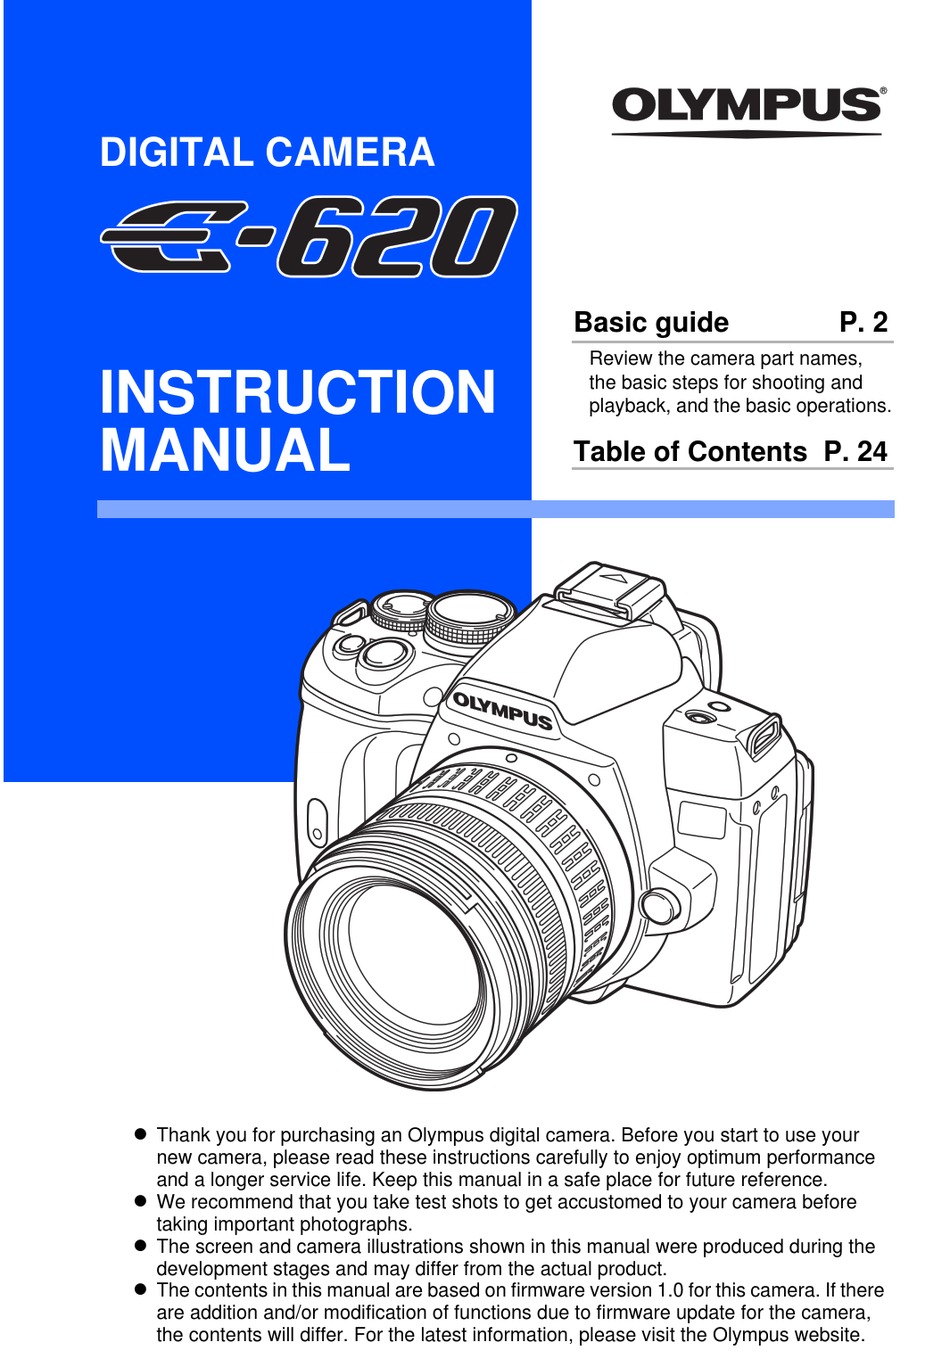 OLYMPUS E-510 DIGITAL CAMERA PRINTED INSTRUCTION MANUAL USER GUIDE 128 PAGES 